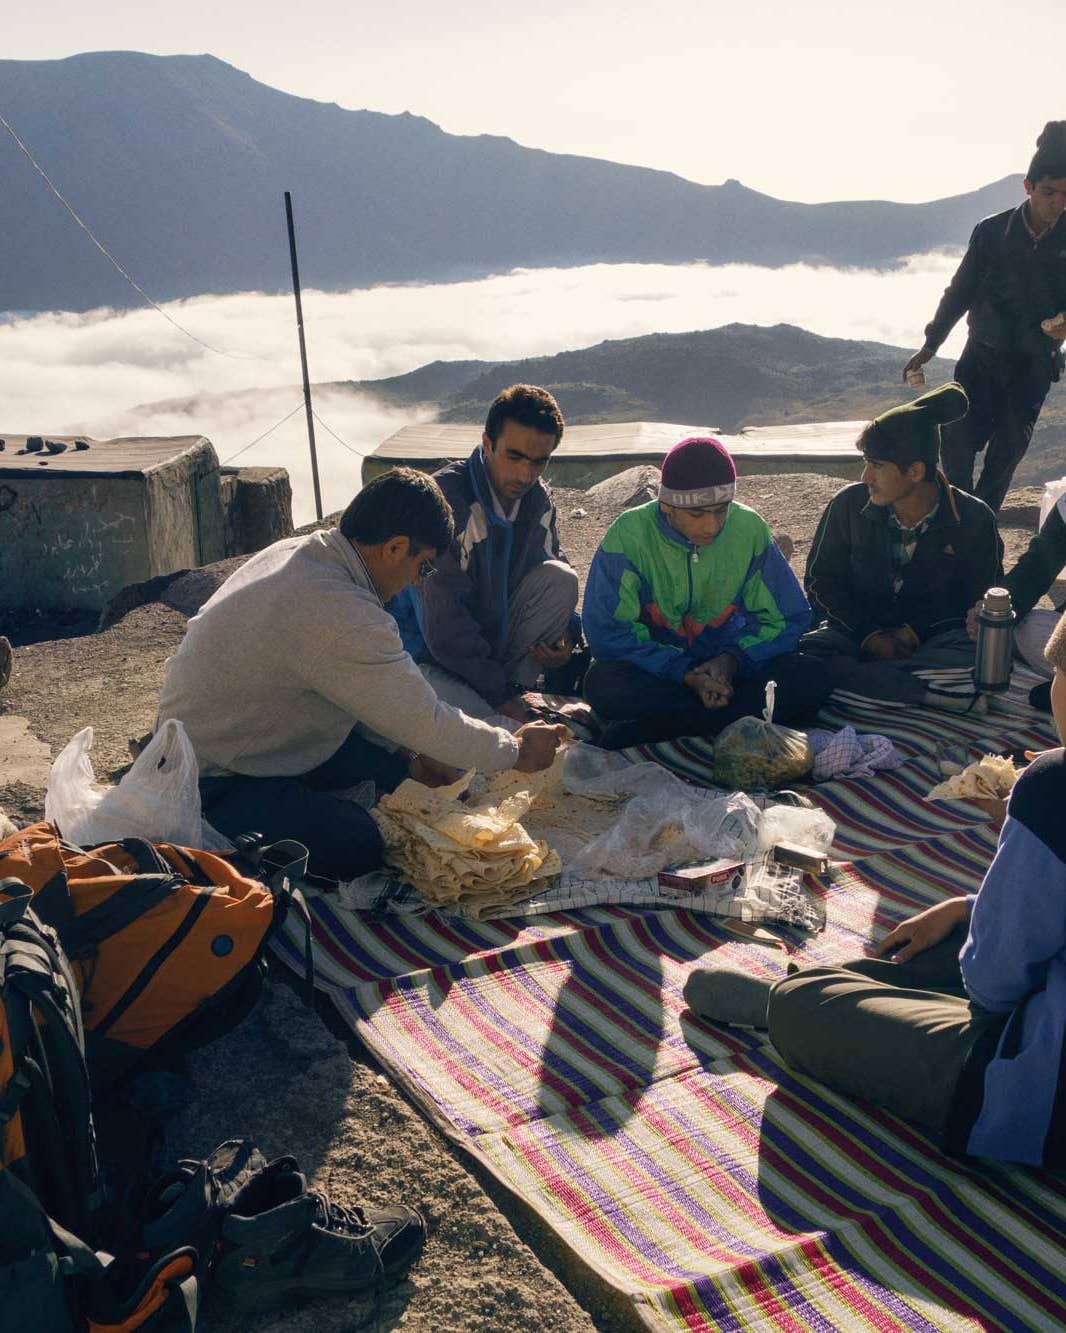 What It’s Like to Eat Breakfast Above the Clouds